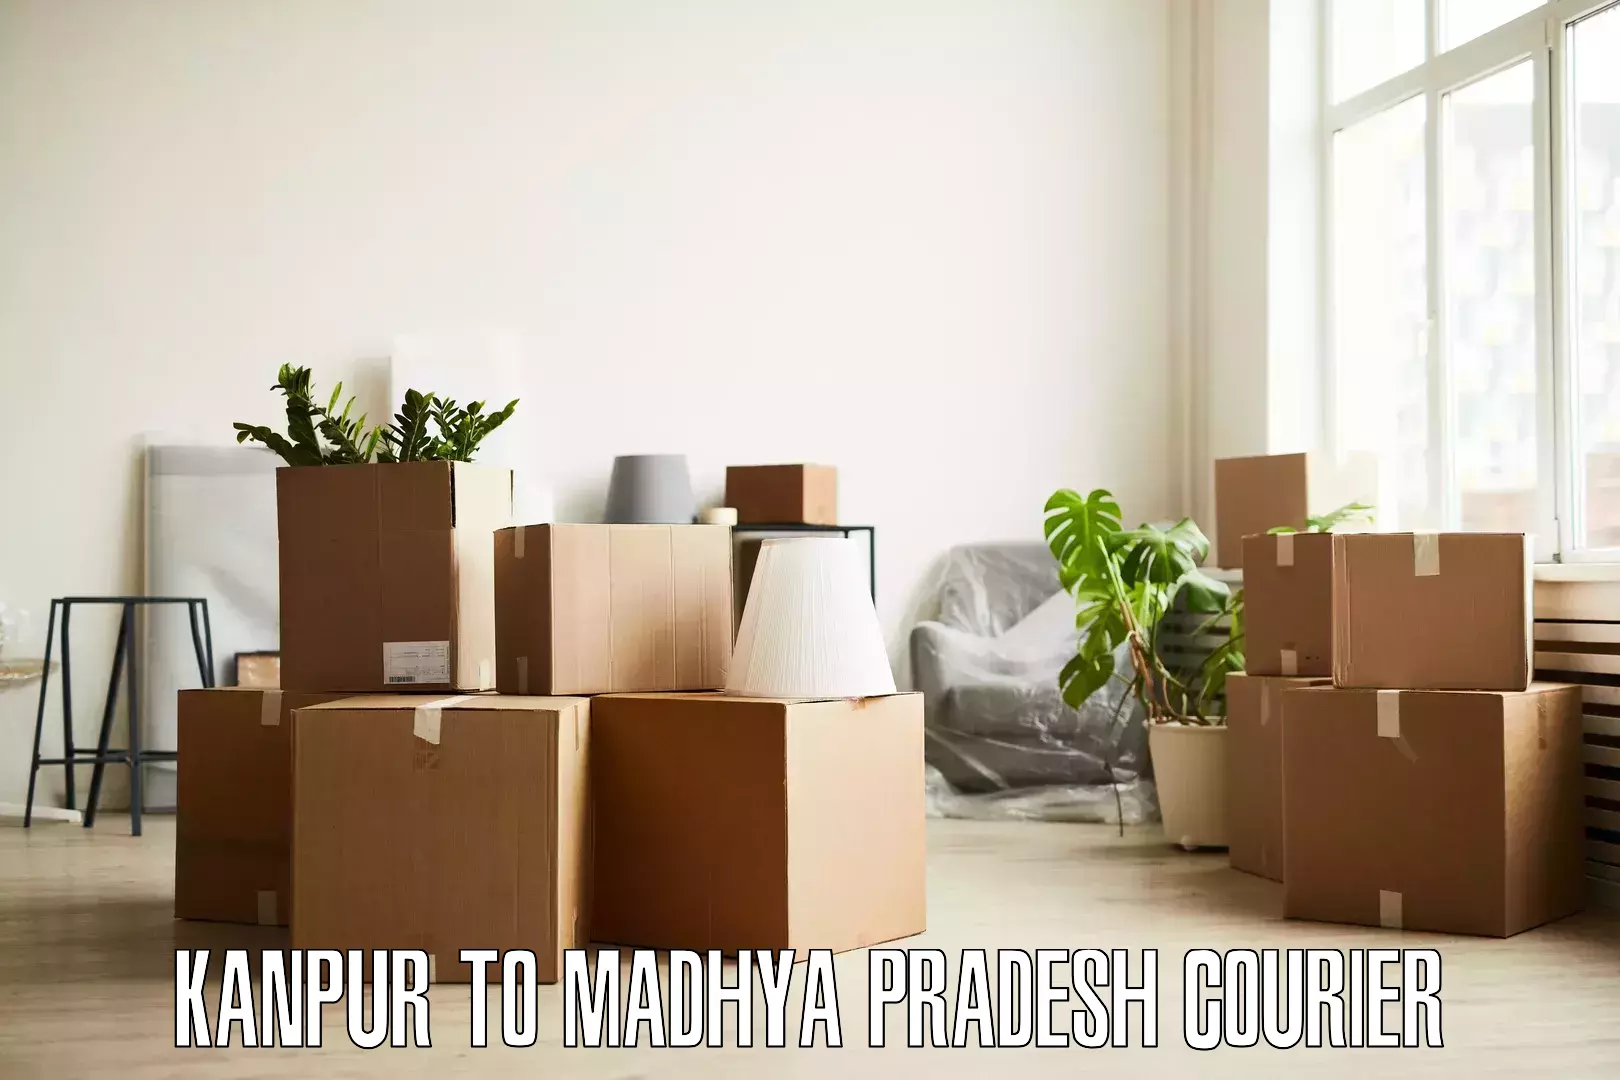 Custom relocation services in Kanpur to Bhopal